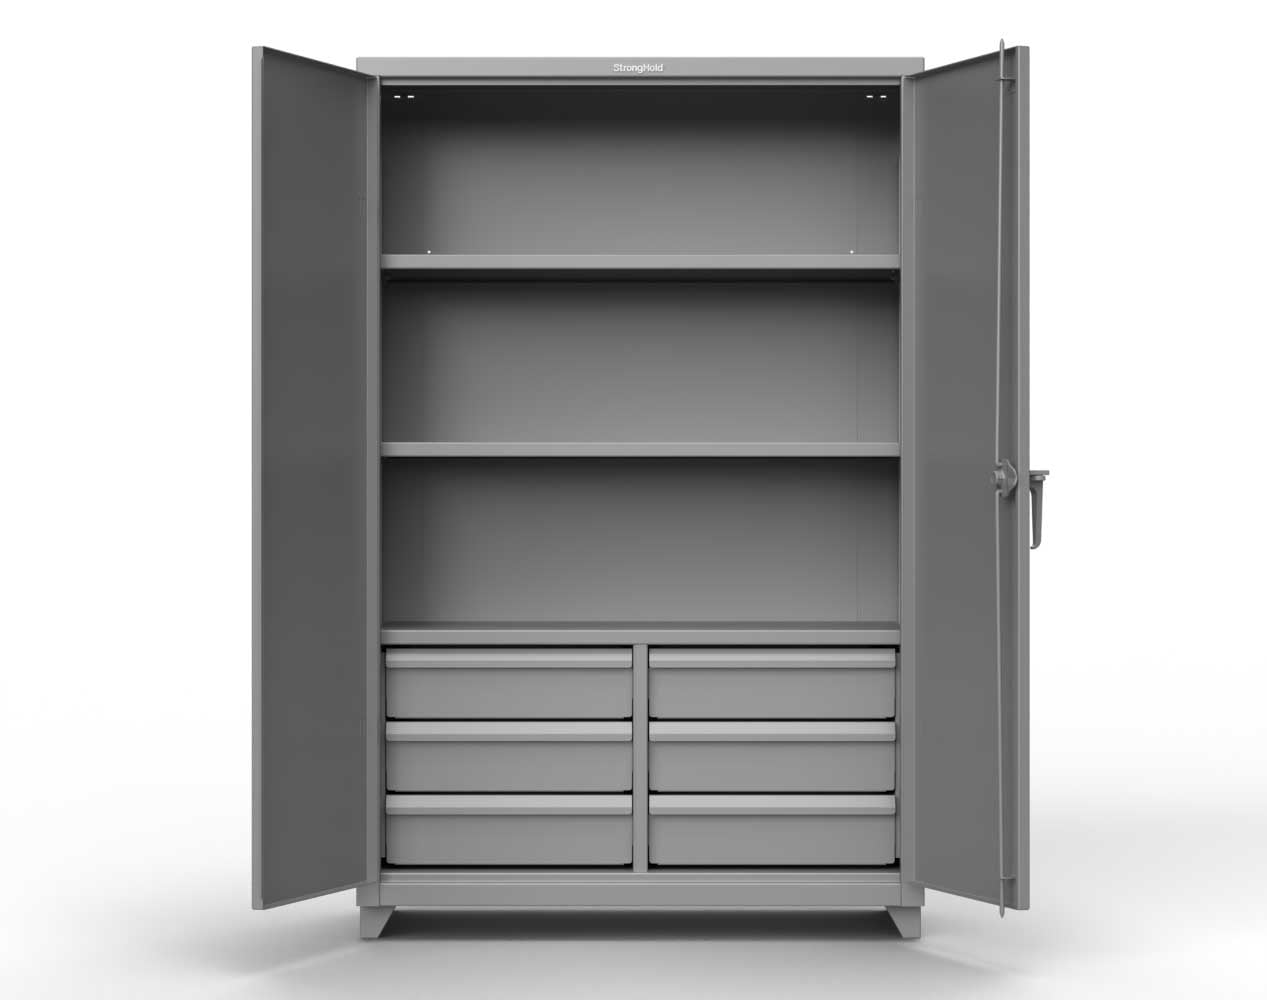 Extra Heavy Duty 14 GA Cabinet with 6 Half-Width Drawers, 3 Shelves - 48 In. W x 24 In. D x 75 In. H